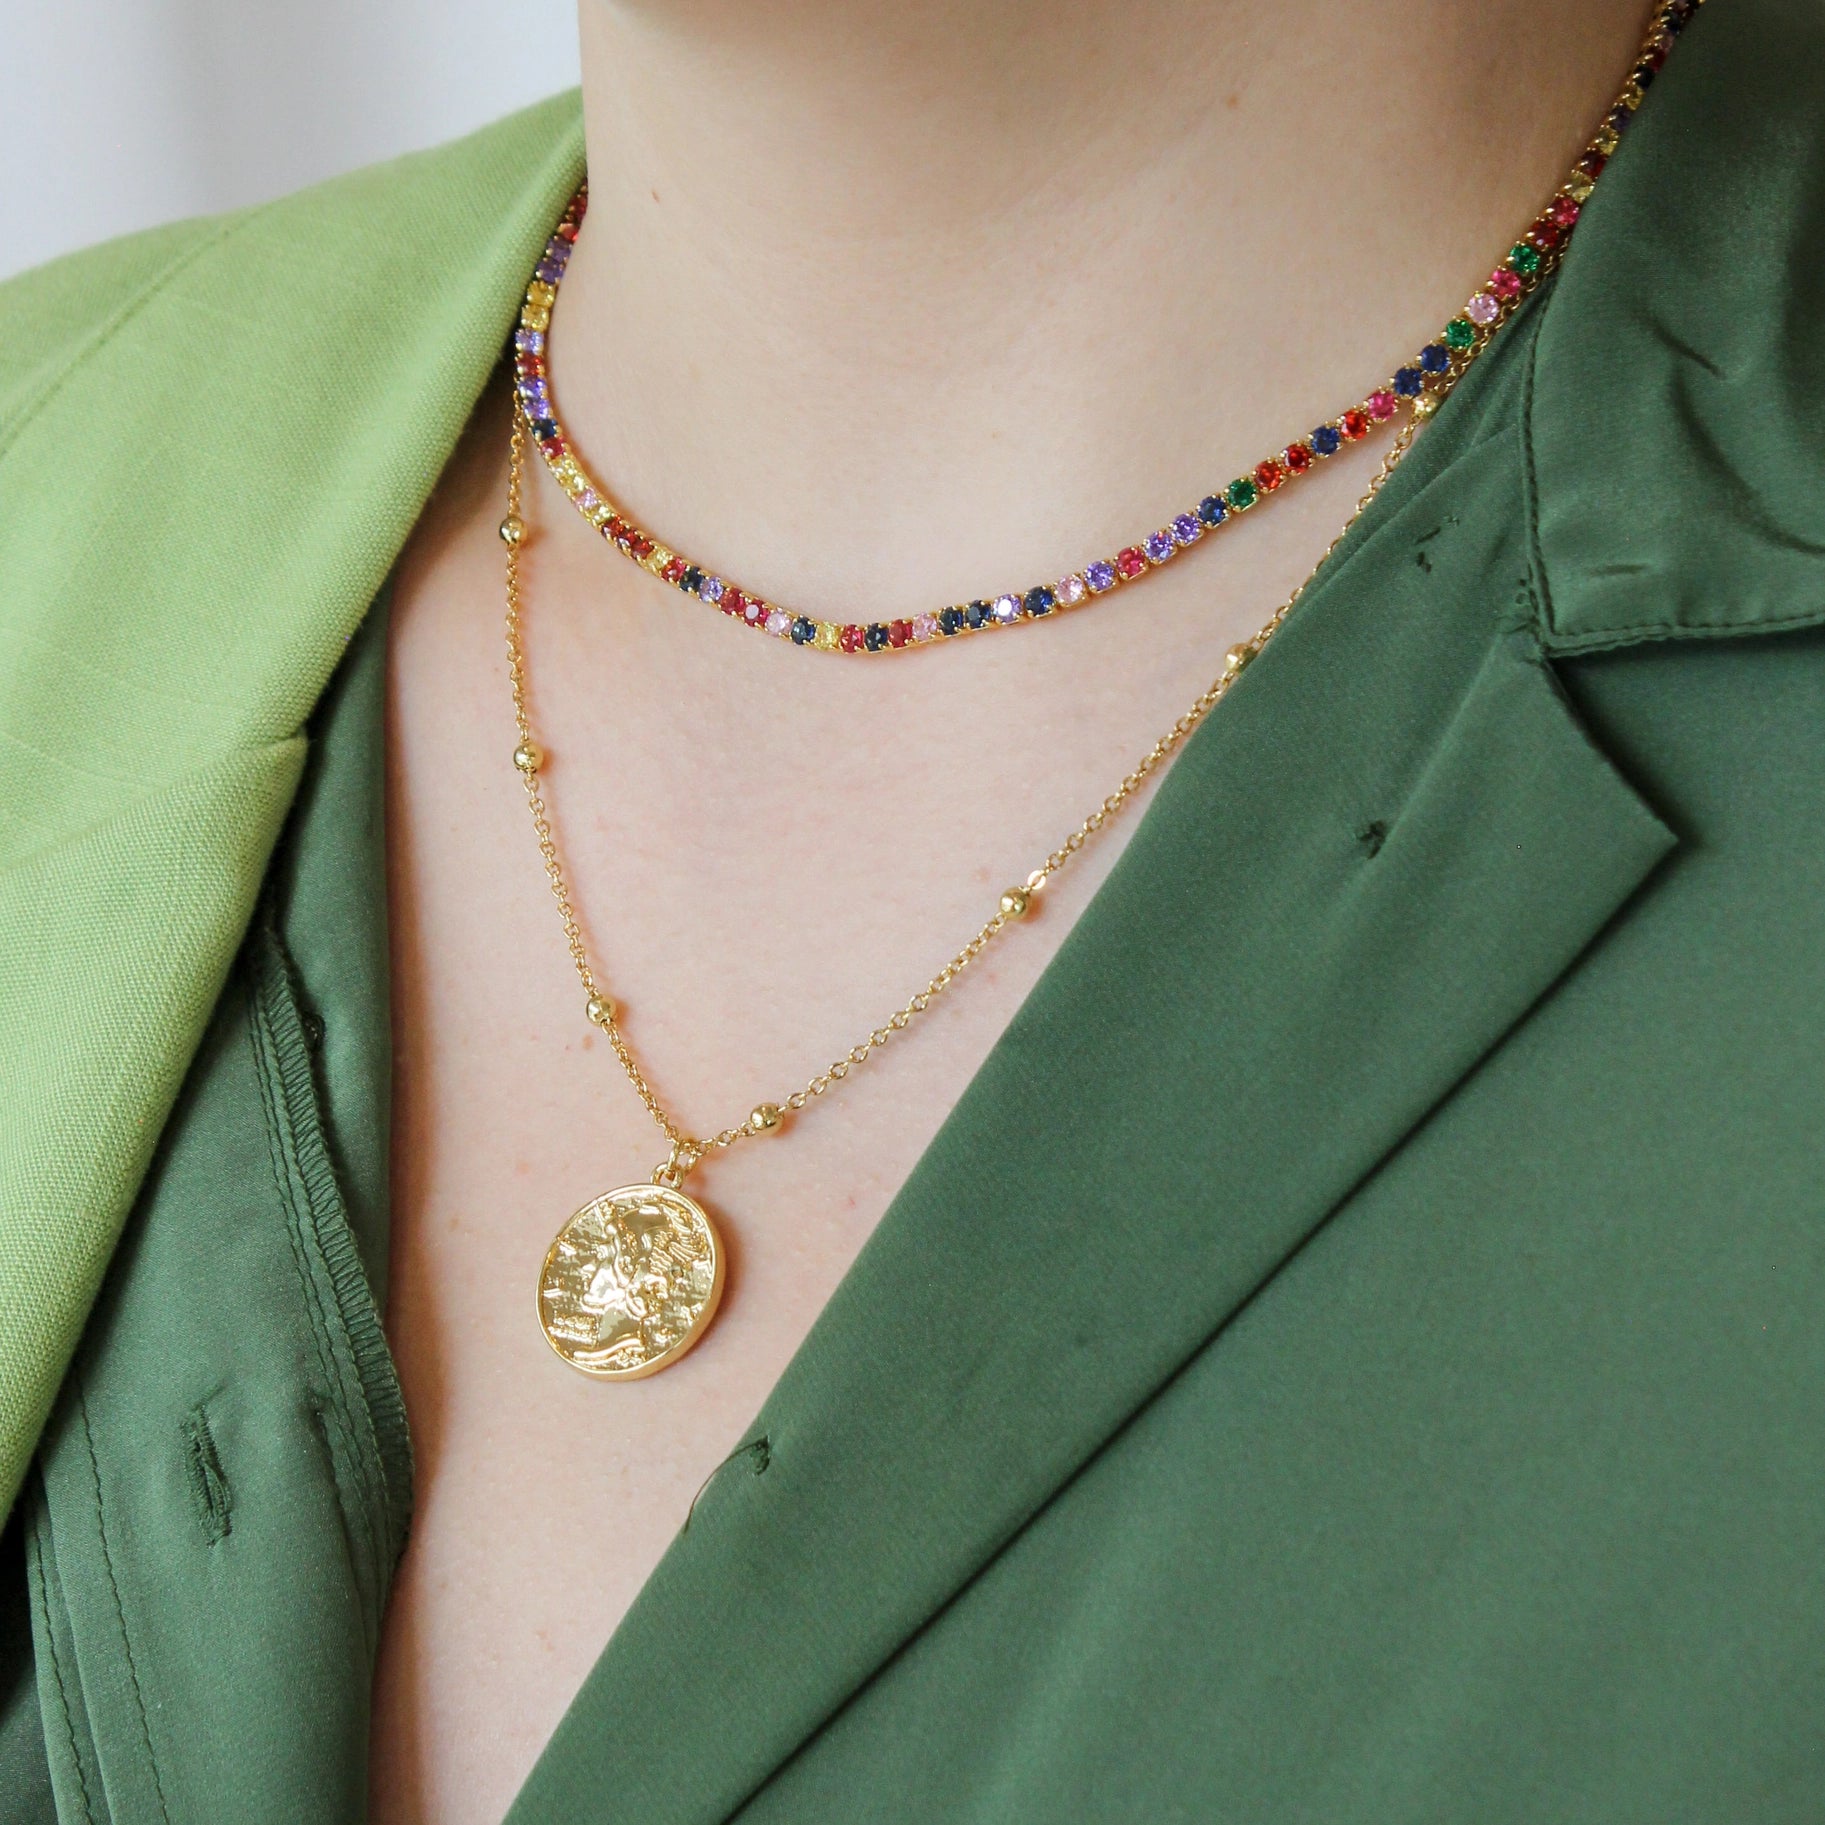 The Hermes Medallion Necklace by MASHALLAH